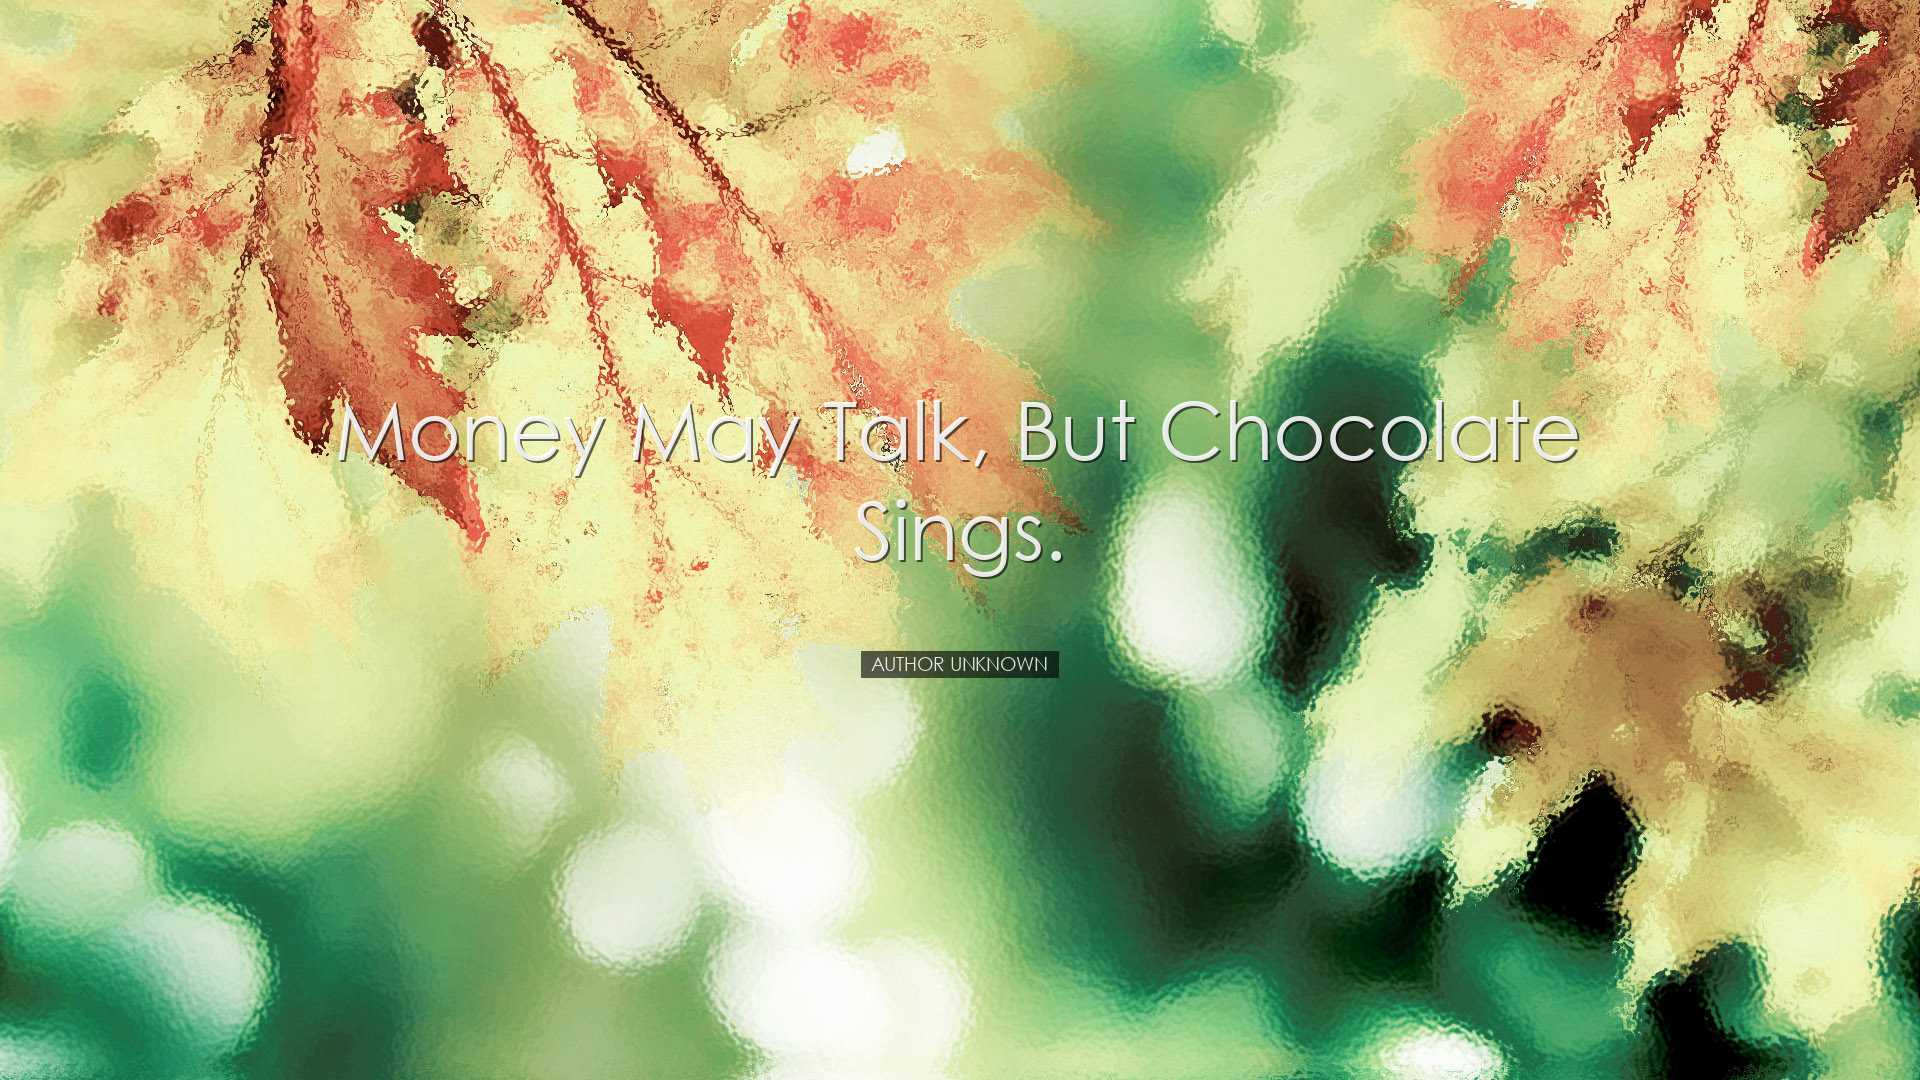 Money may talk, but chocolate sings. - Author Unknown